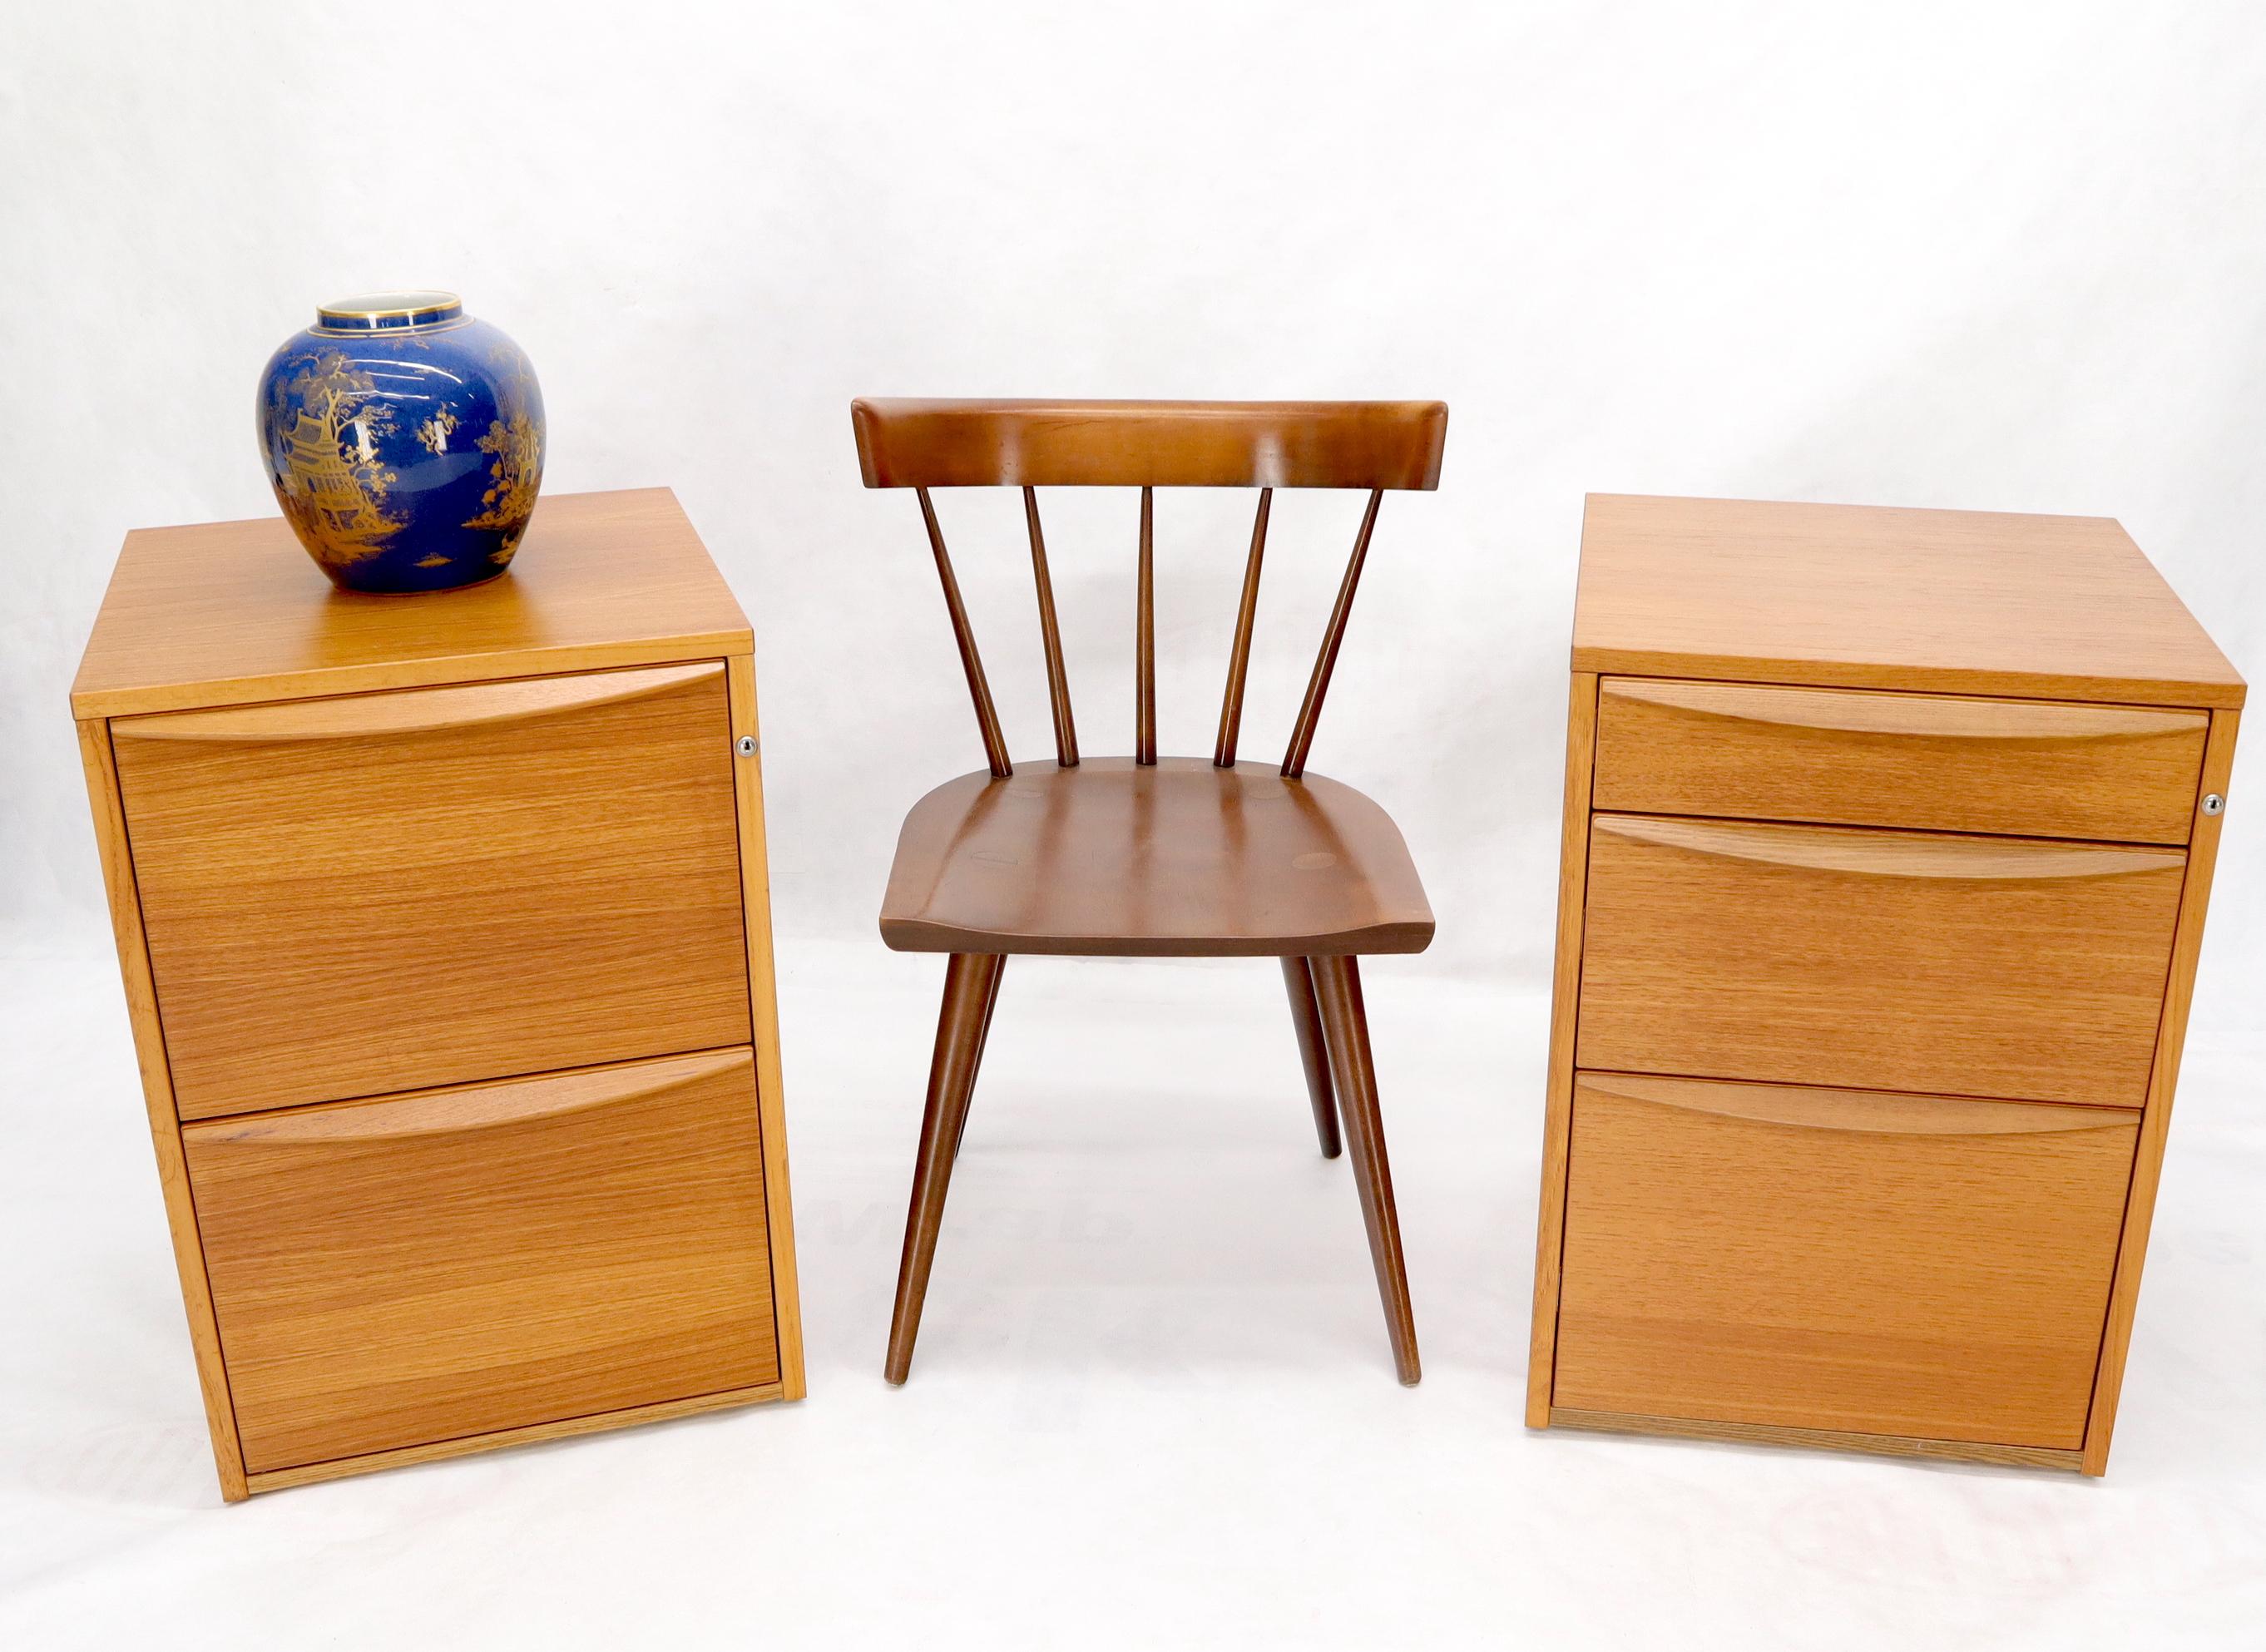 Pair of high grade teak file cabinets pedestals. With a right glass top for a desk of your own configuration. They are just perfect for making a glass top double pedestal writing console table or desk. Can be easily moves around with the built in